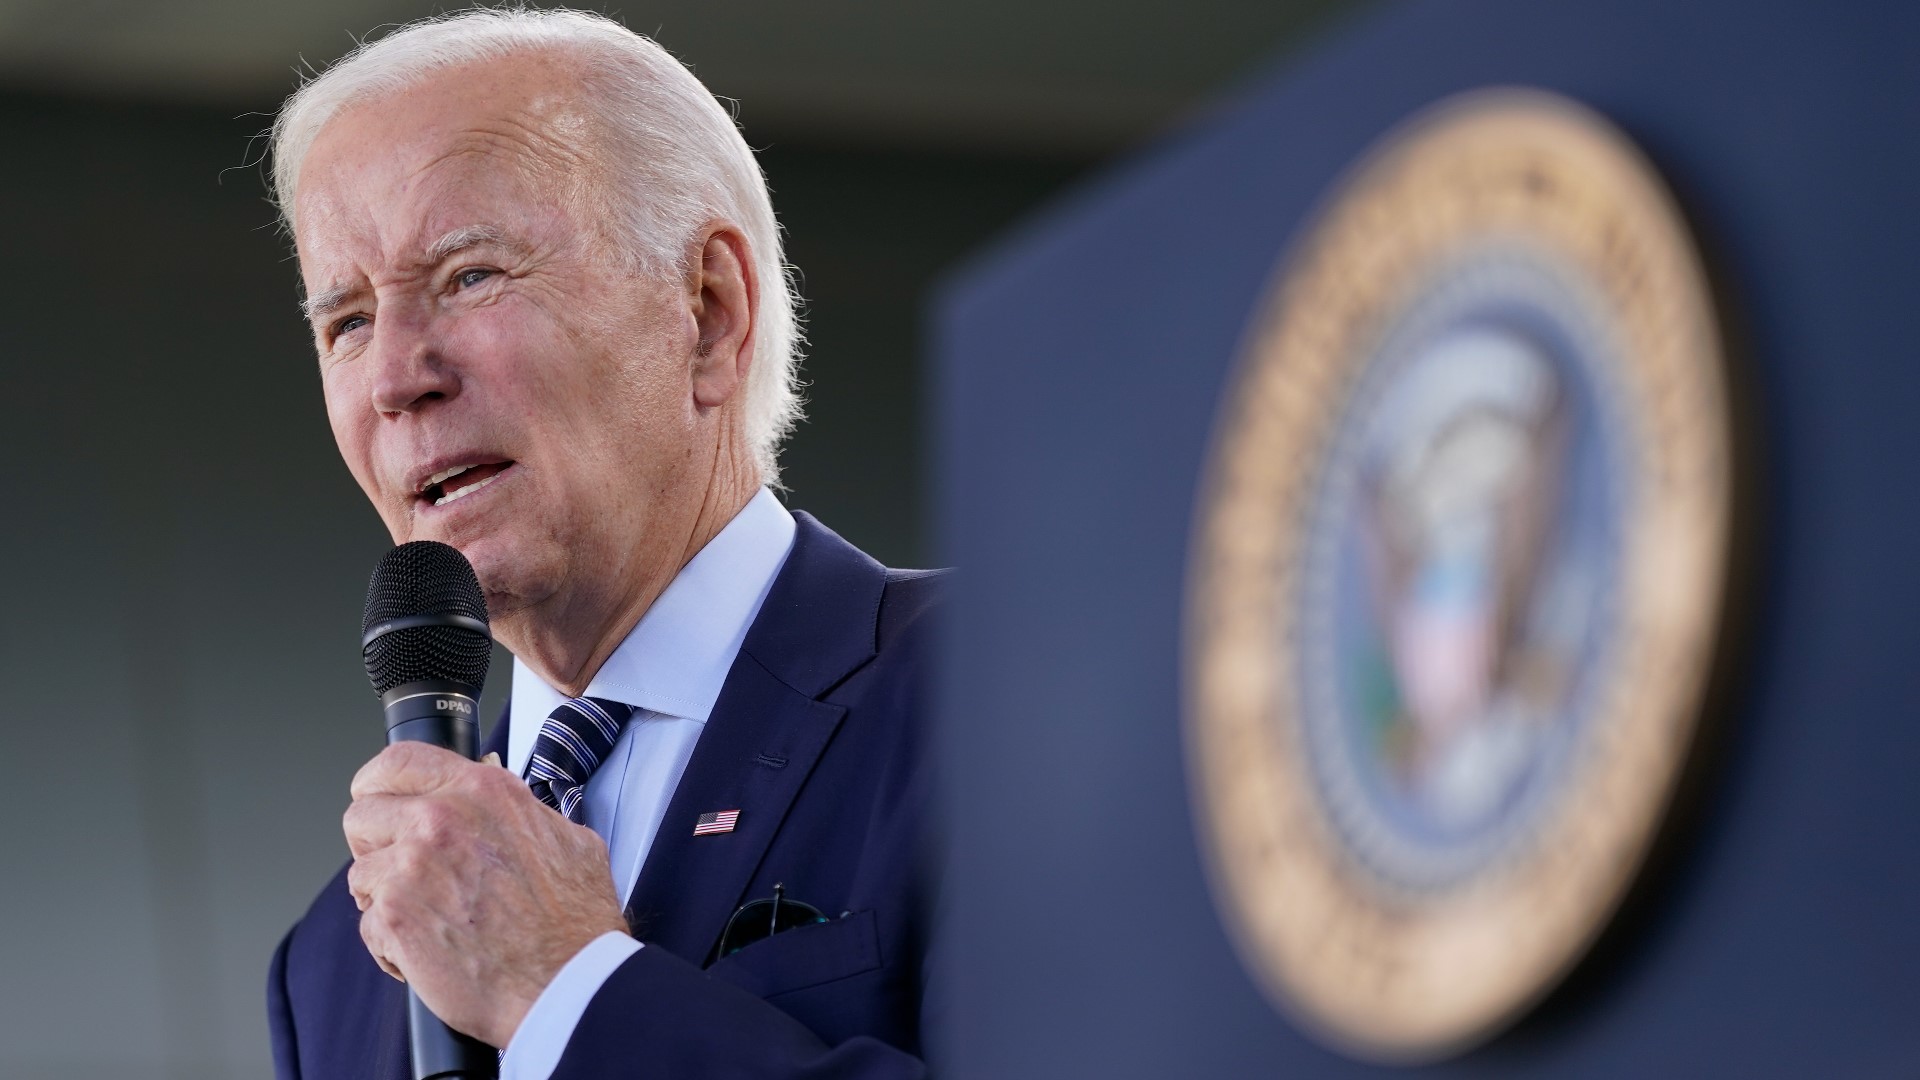 President Joe Biden is starting the campaign year by evoking the Revolutionary War to mark the third anniversary of the deadly insurrection at the U.S. Capitol.